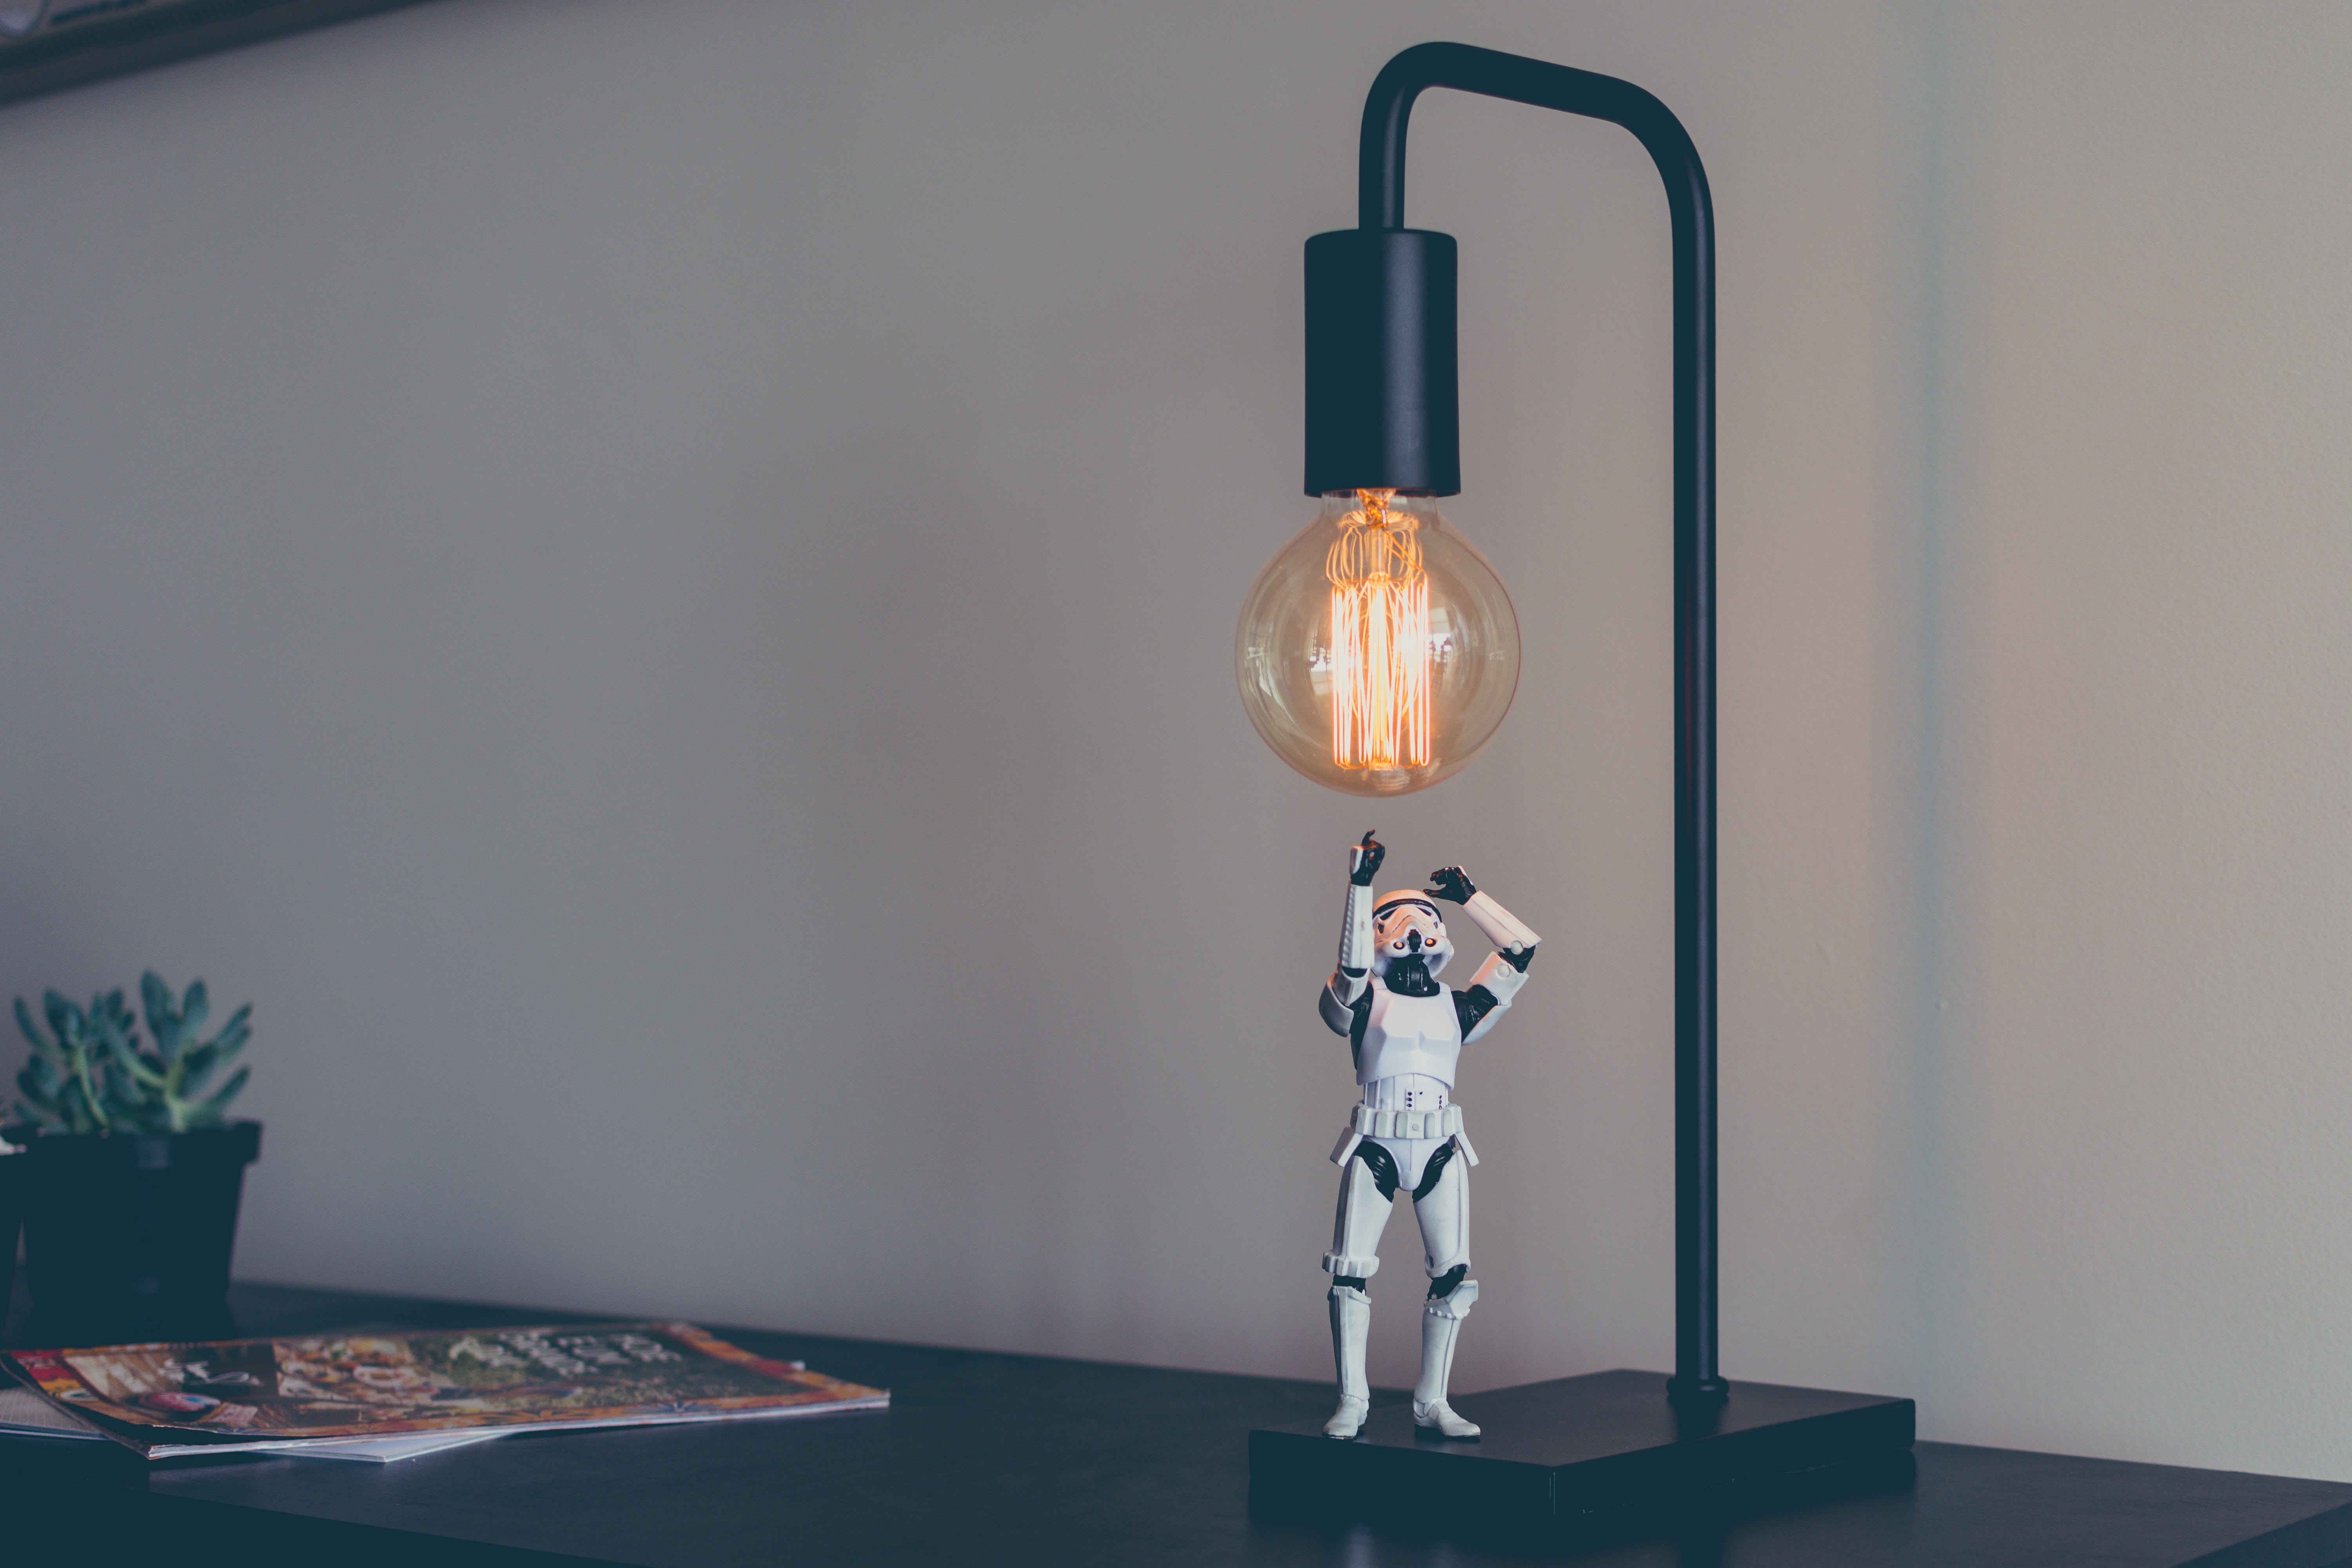 “A figurine of a stormtrooper under a desk lamp with an incandescent light bulb” by James Pond on Unsplash